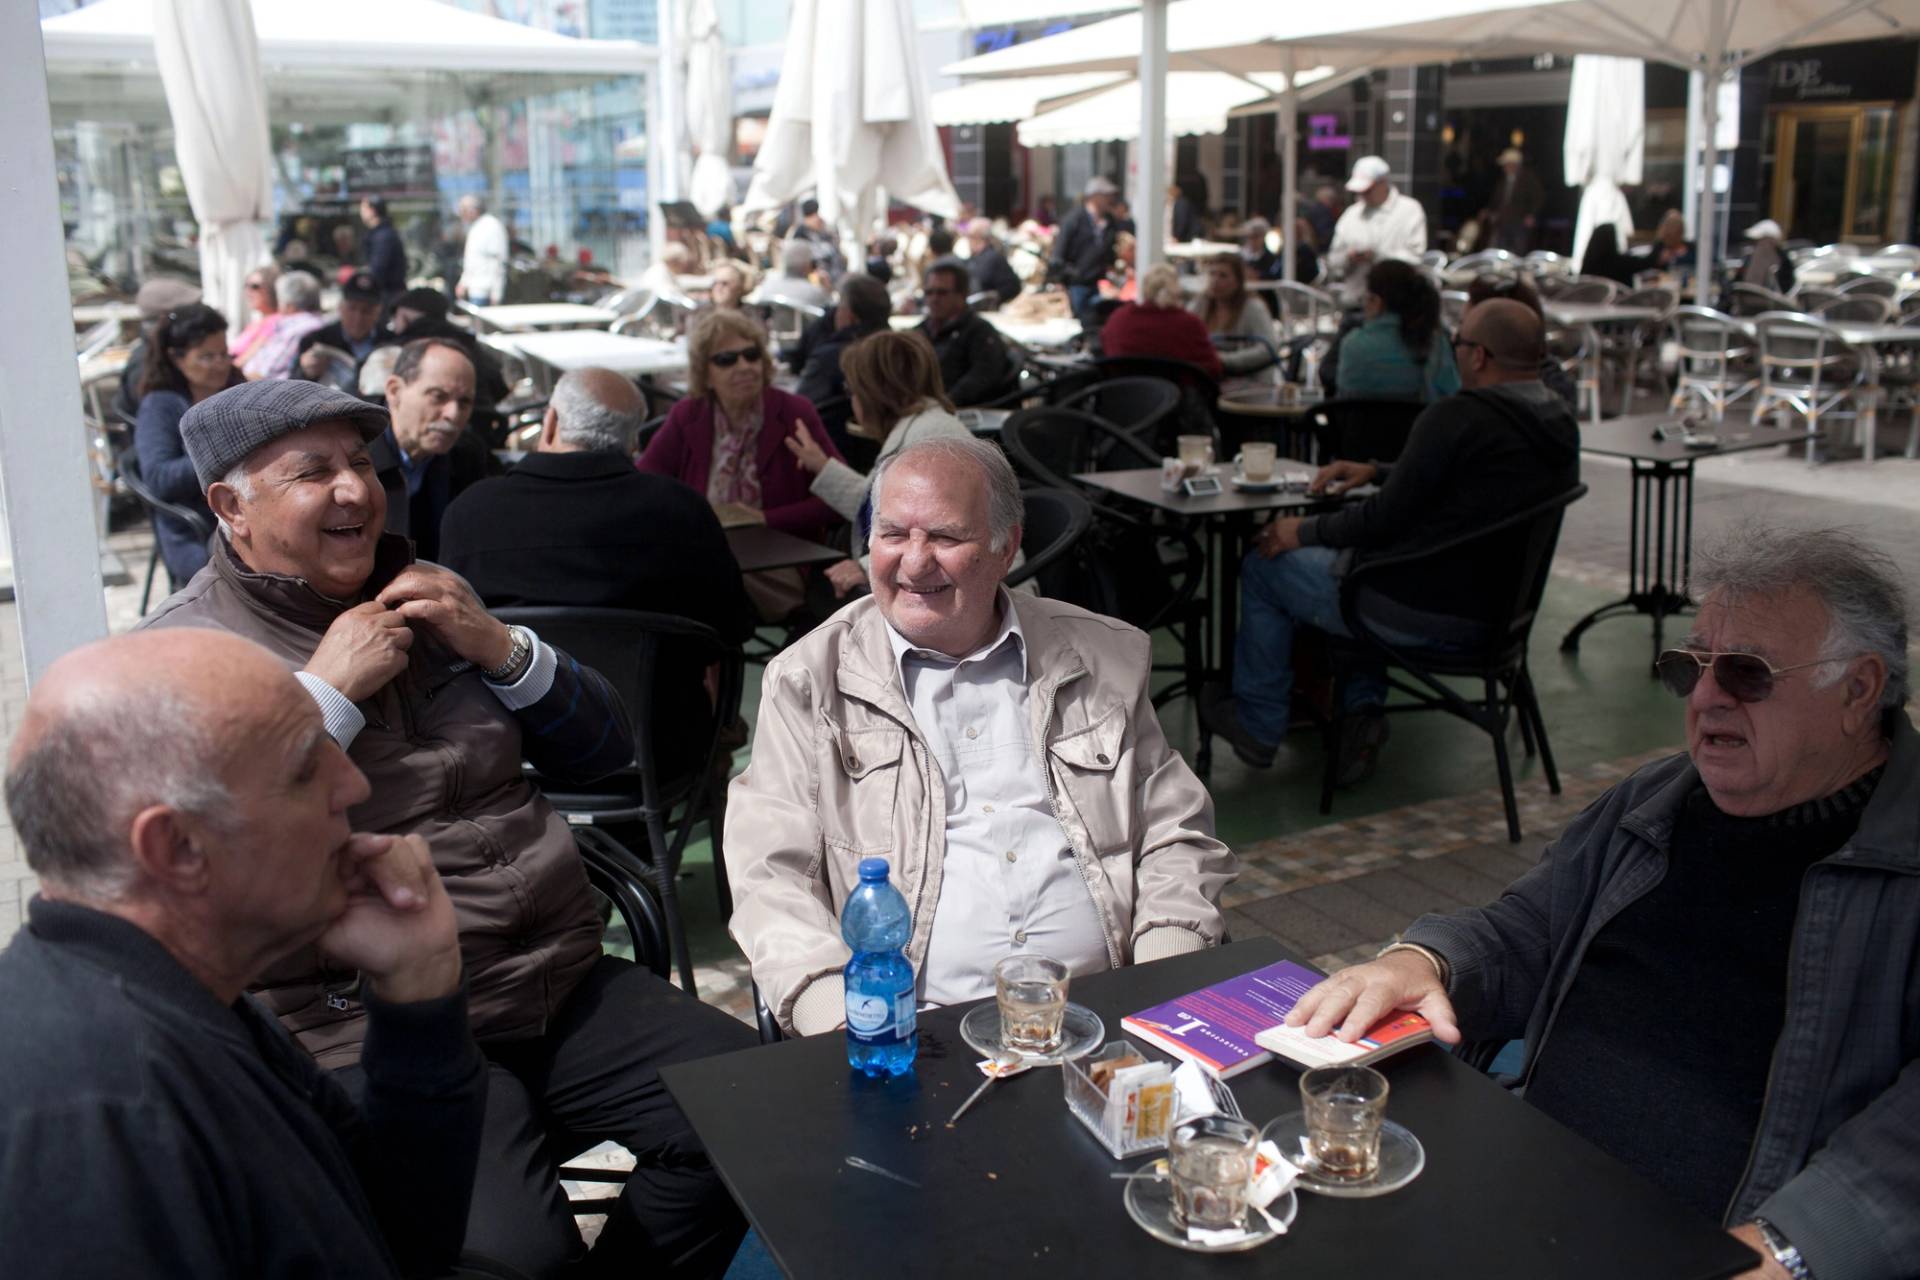 Members of the French community sit in a coffee shop in Netanya, Israel, on March 12, 2015